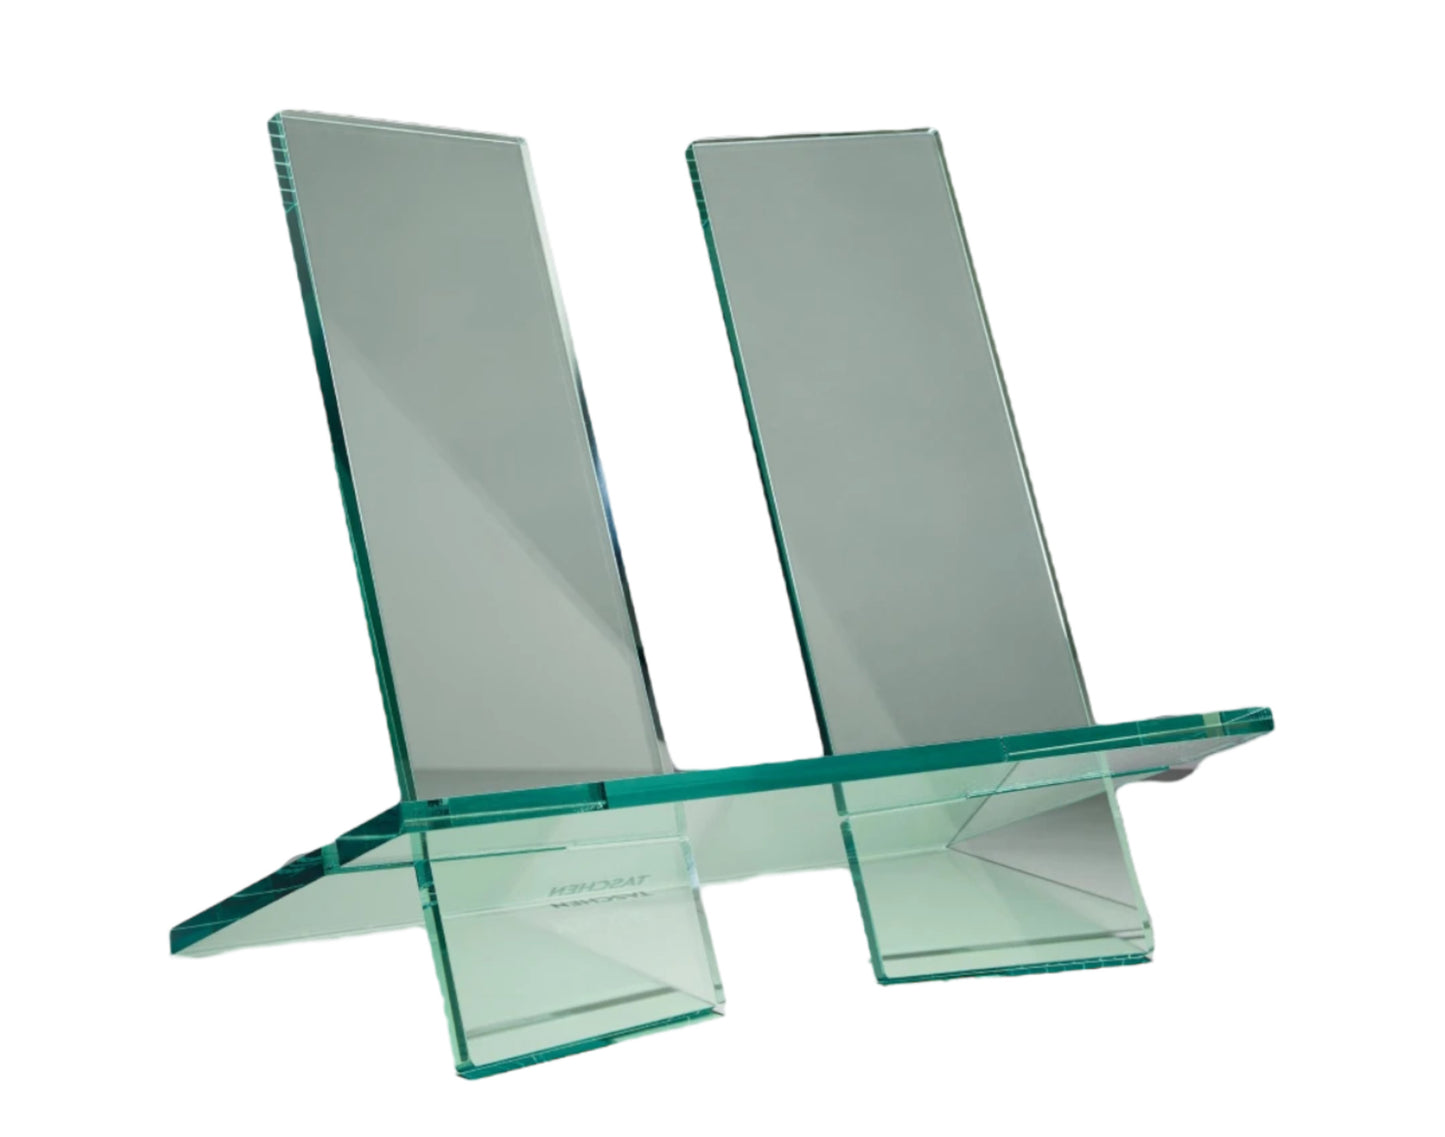 Taschen Books - Bookstand. Extra-Large. Crystal Green - Display Holder